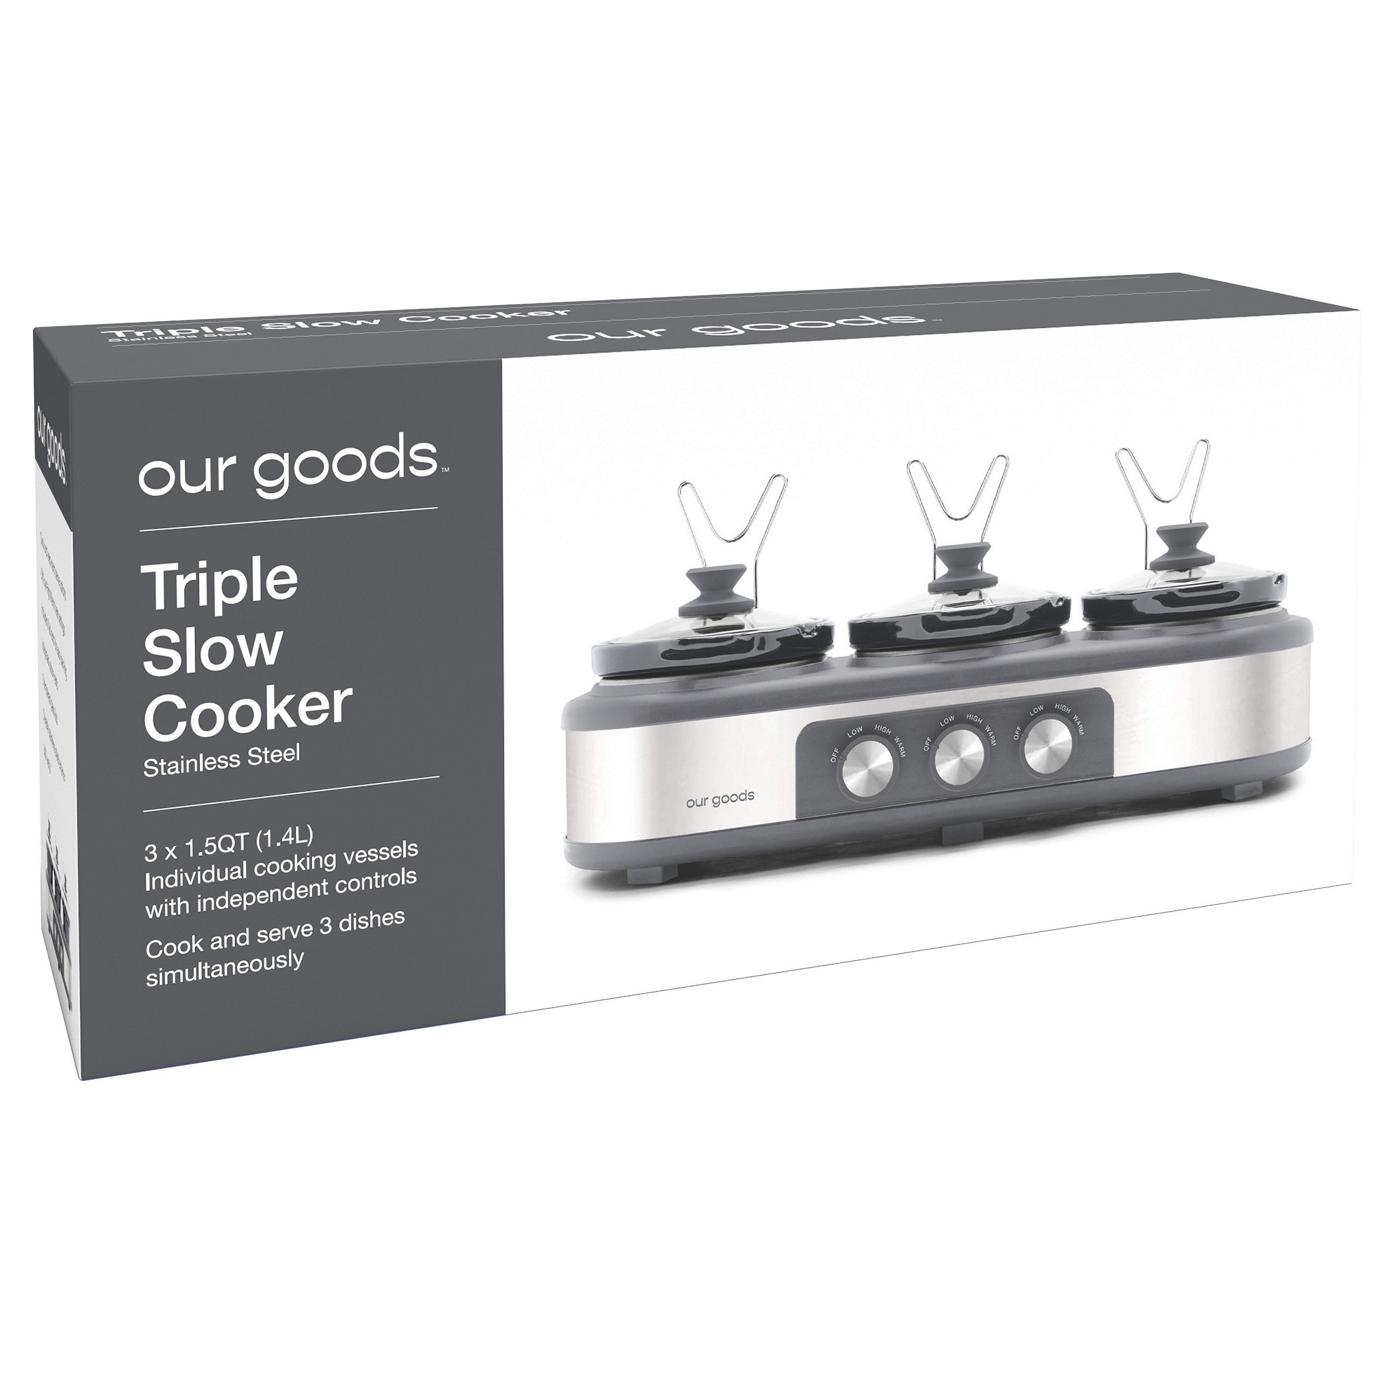 our goods Triple Slow Cooker - Stainless Steel; image 2 of 3